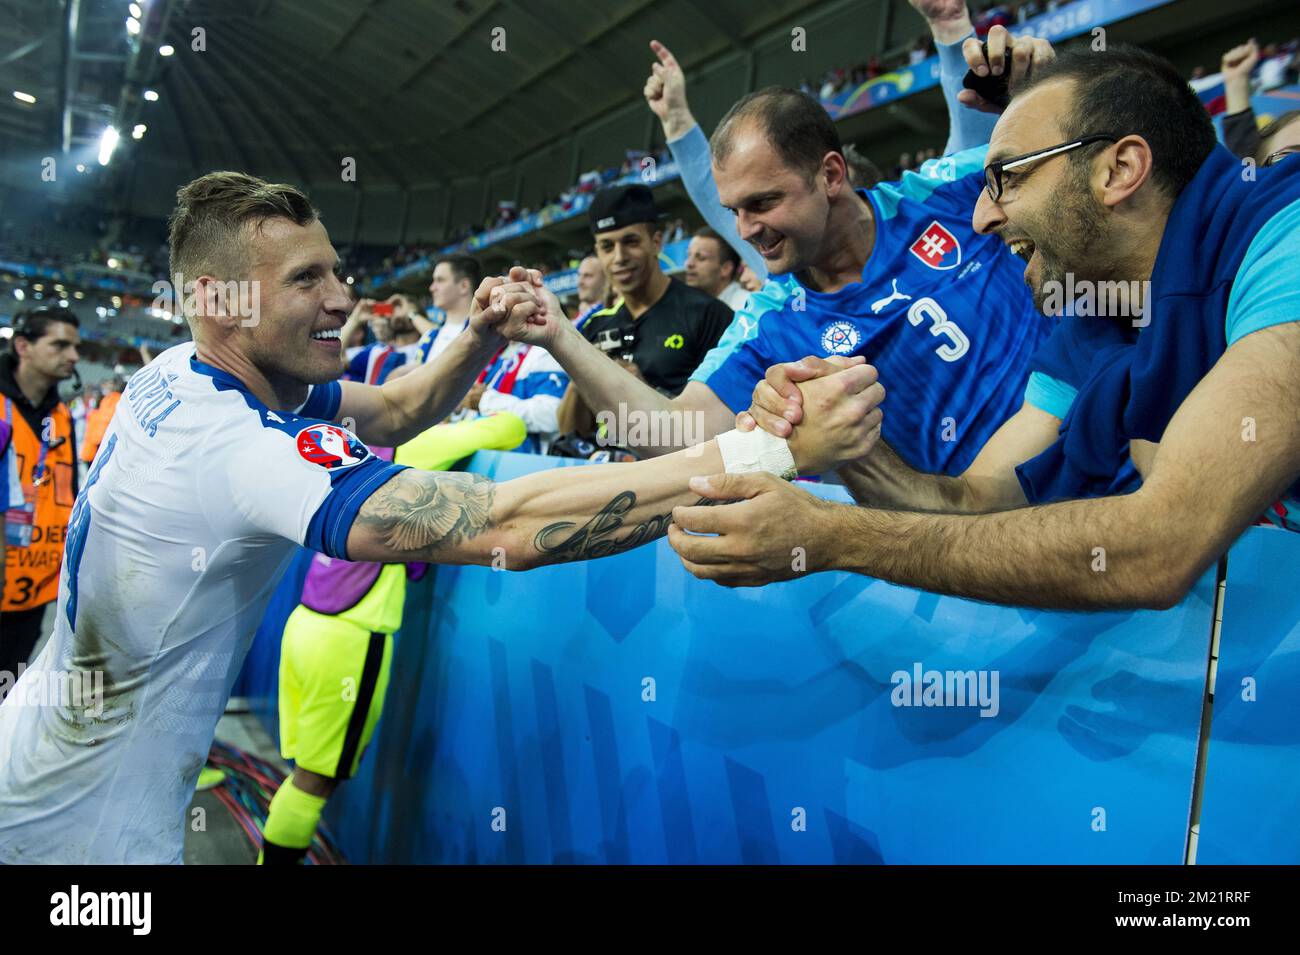 Sergei Ignashevich celebrate after winning a soccer game between Russian national soccer team Slovakia, in group B of the group stage of the UEFA Euro 2016 European Championships, Wednesday 15 June 2016 in Lille, France in Gent. Wednesday 15 June 2016  BELGA PHOTO JASPER JACOBS Stock Photo